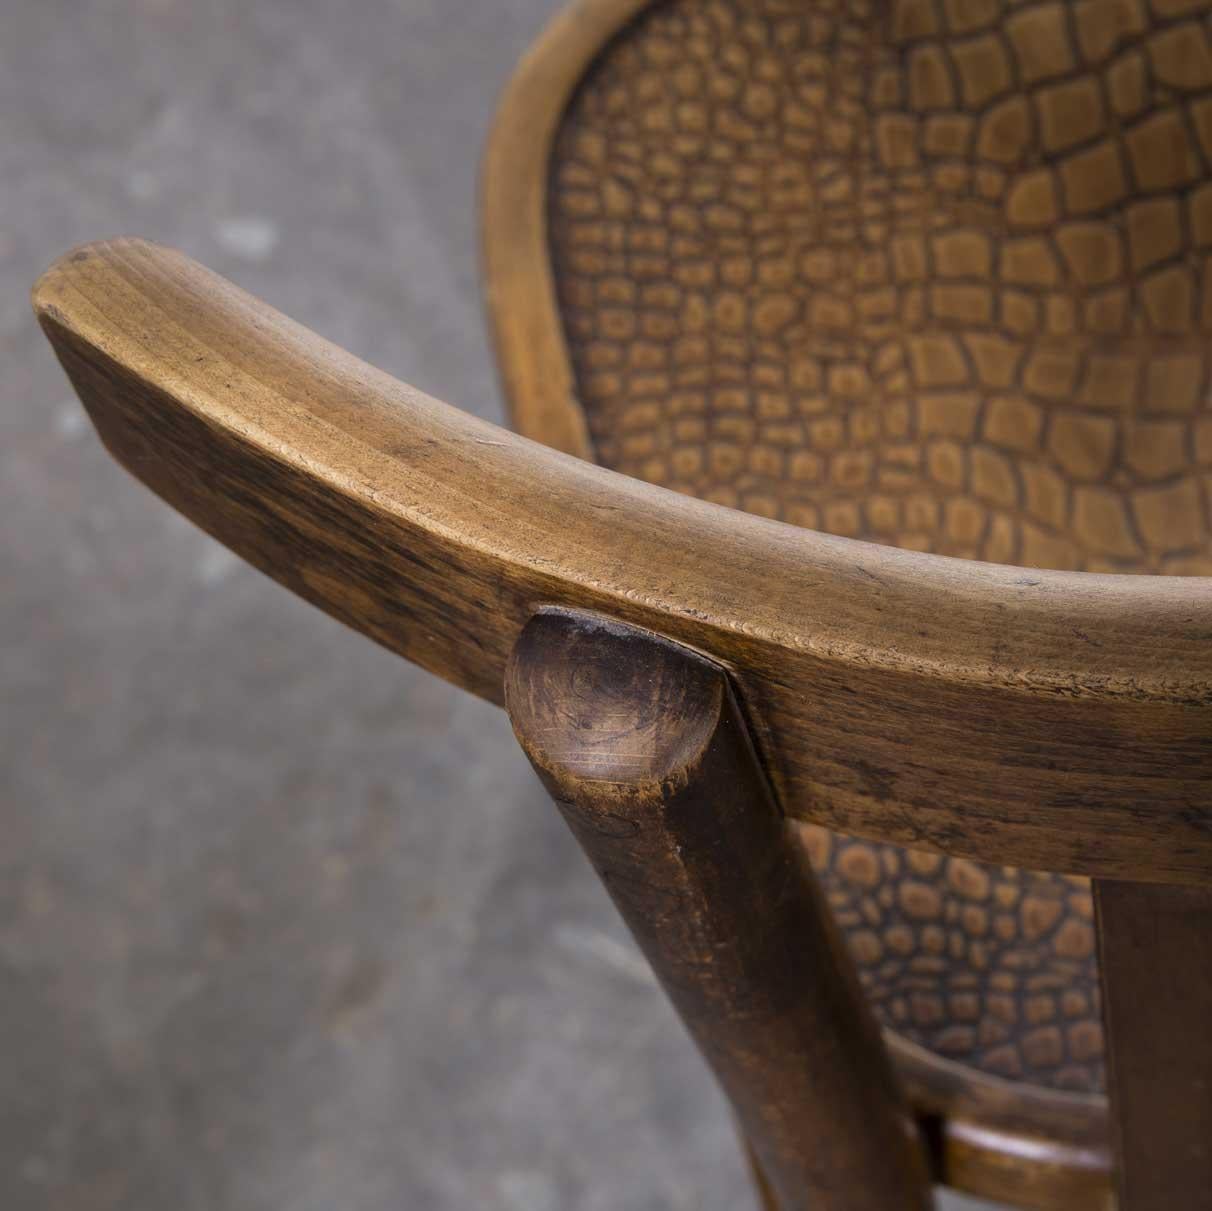 1940’s Pair of Fischel bentwood chairs – patterned seat
1940’s Pair of Fischel bentwood chairs – patterned seat. The process of steam bending beech to create elegant chairs was discovered and developed by Thonet, but when its patents expired in